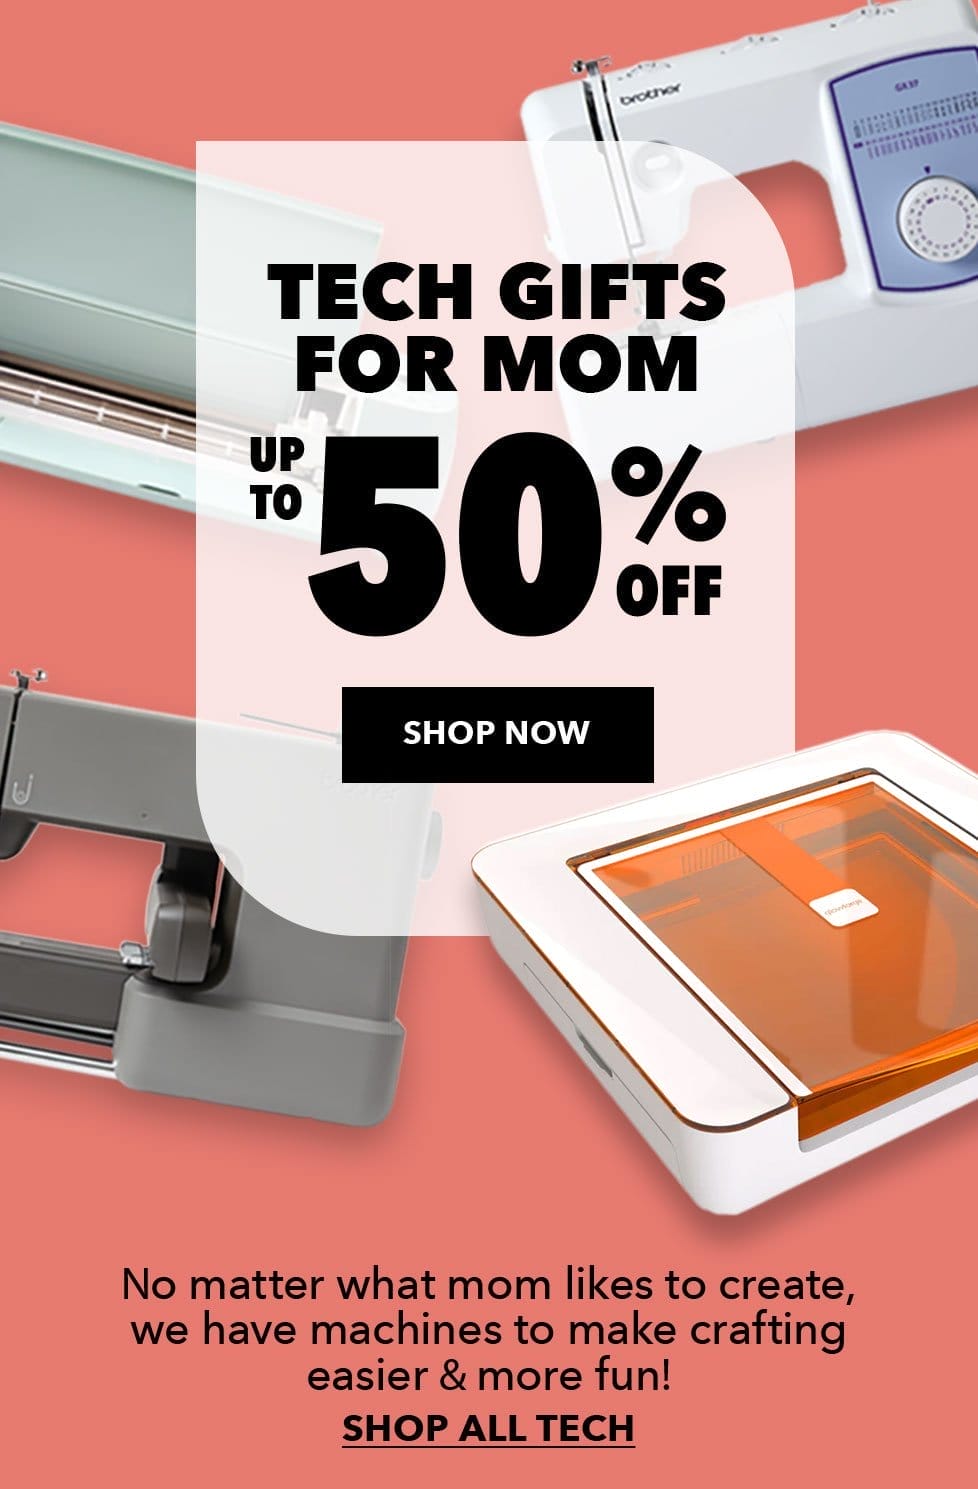 Tech Gifts For Mom. Up to 50% off. Shop Now.